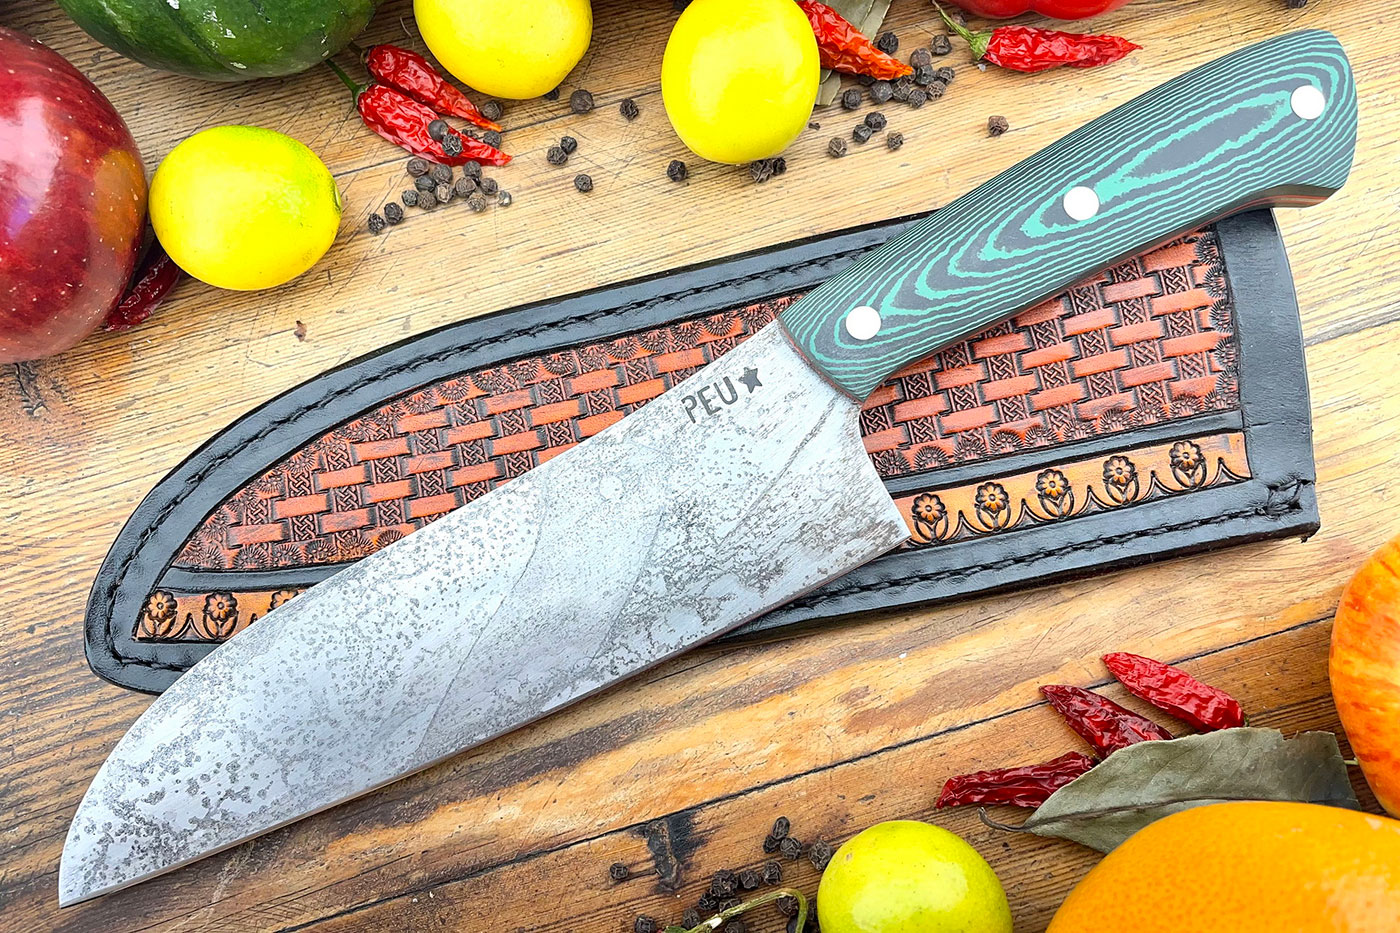 Chef's Knife (Santoku) with Green/Black Micarta and O2 Carbon Steel